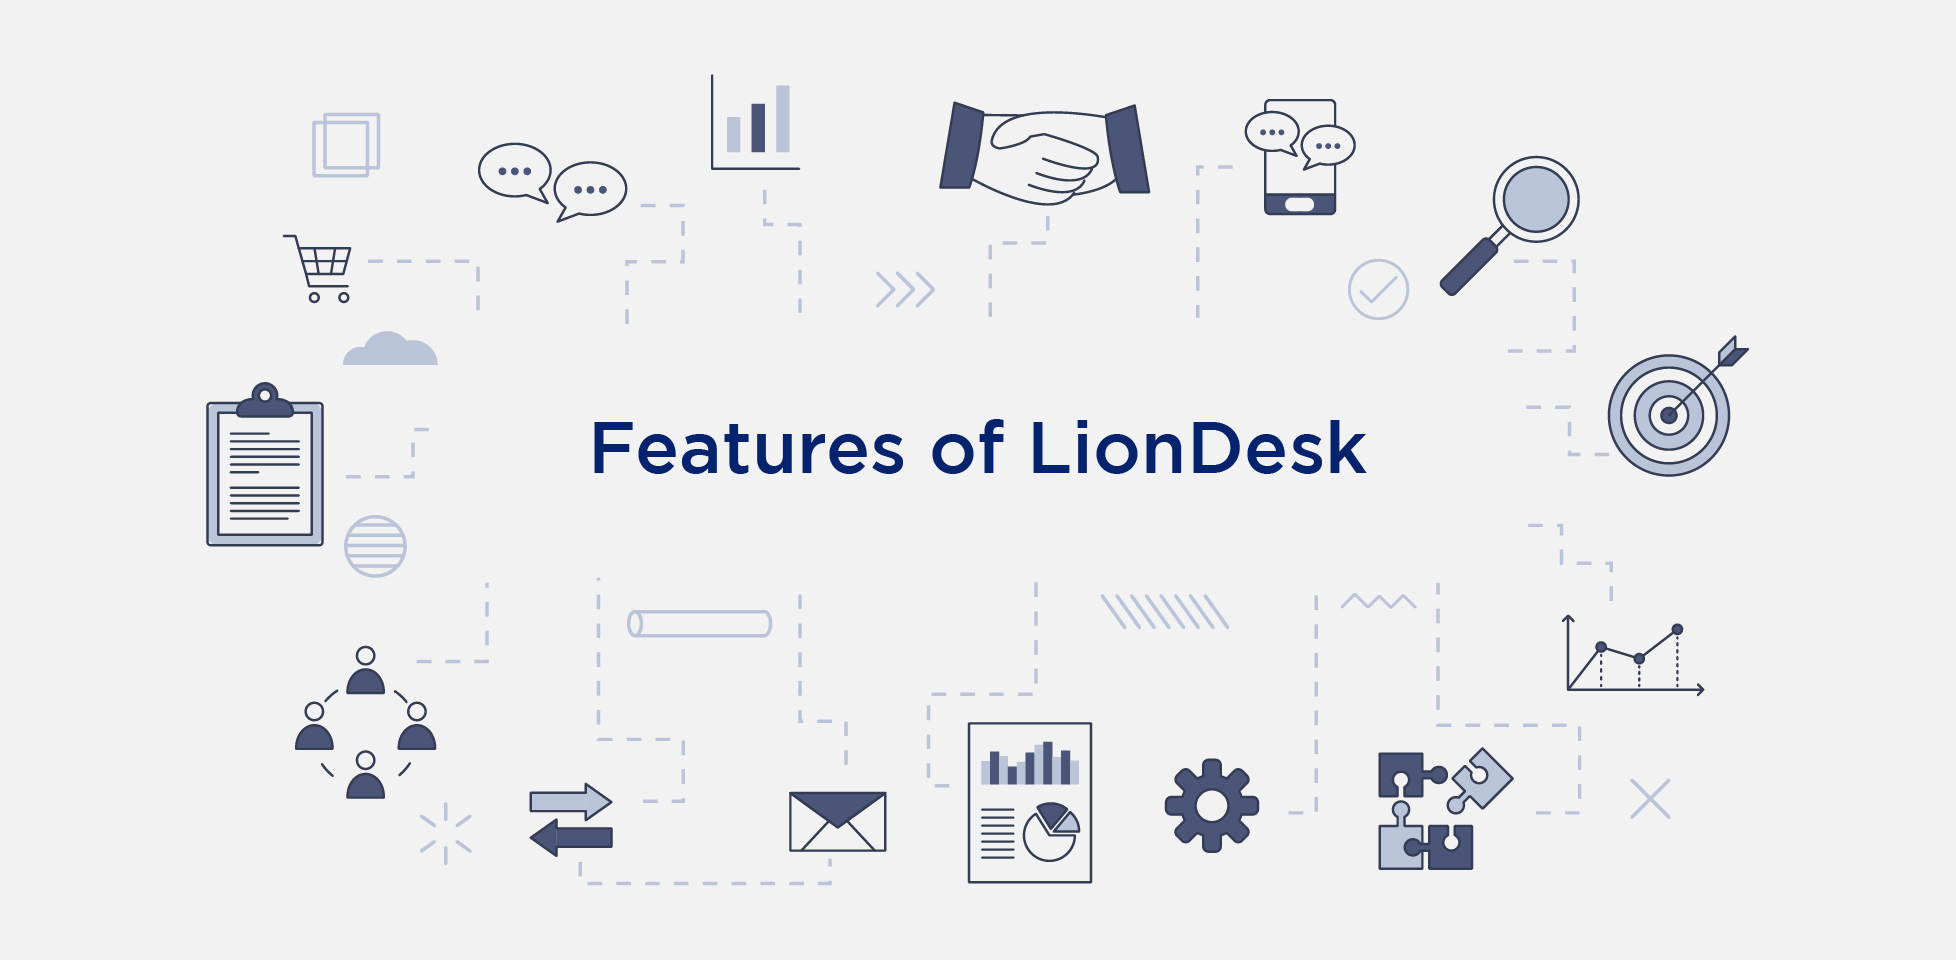 Features of LionDesk